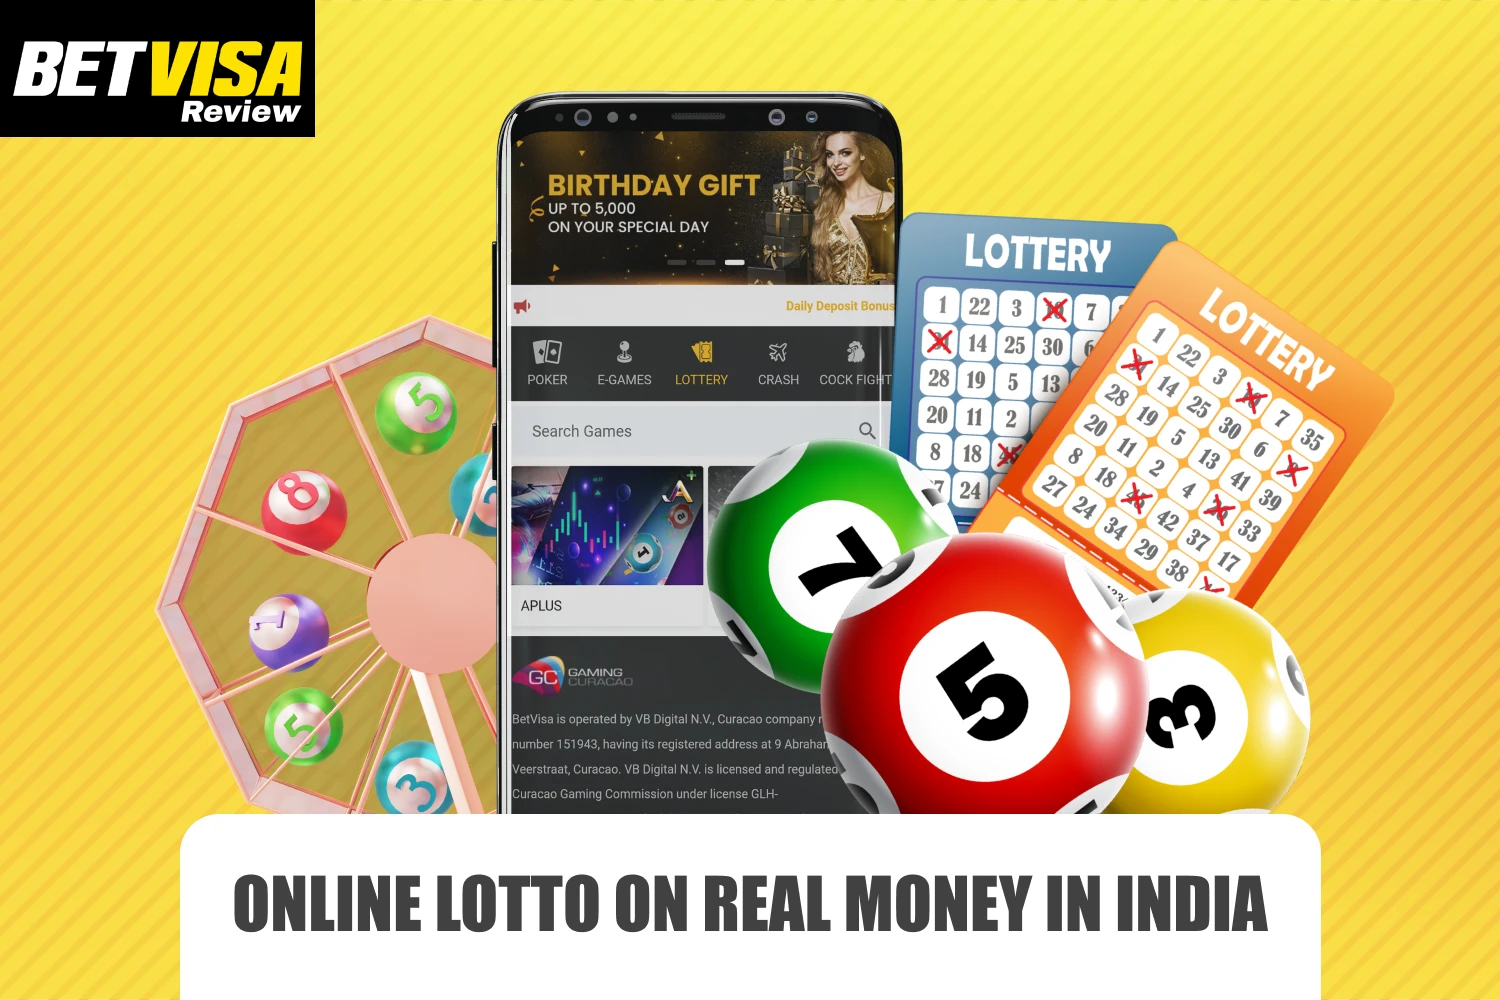 Online bingo at Betvisa India is a classic game with great graphics, usability and fair play